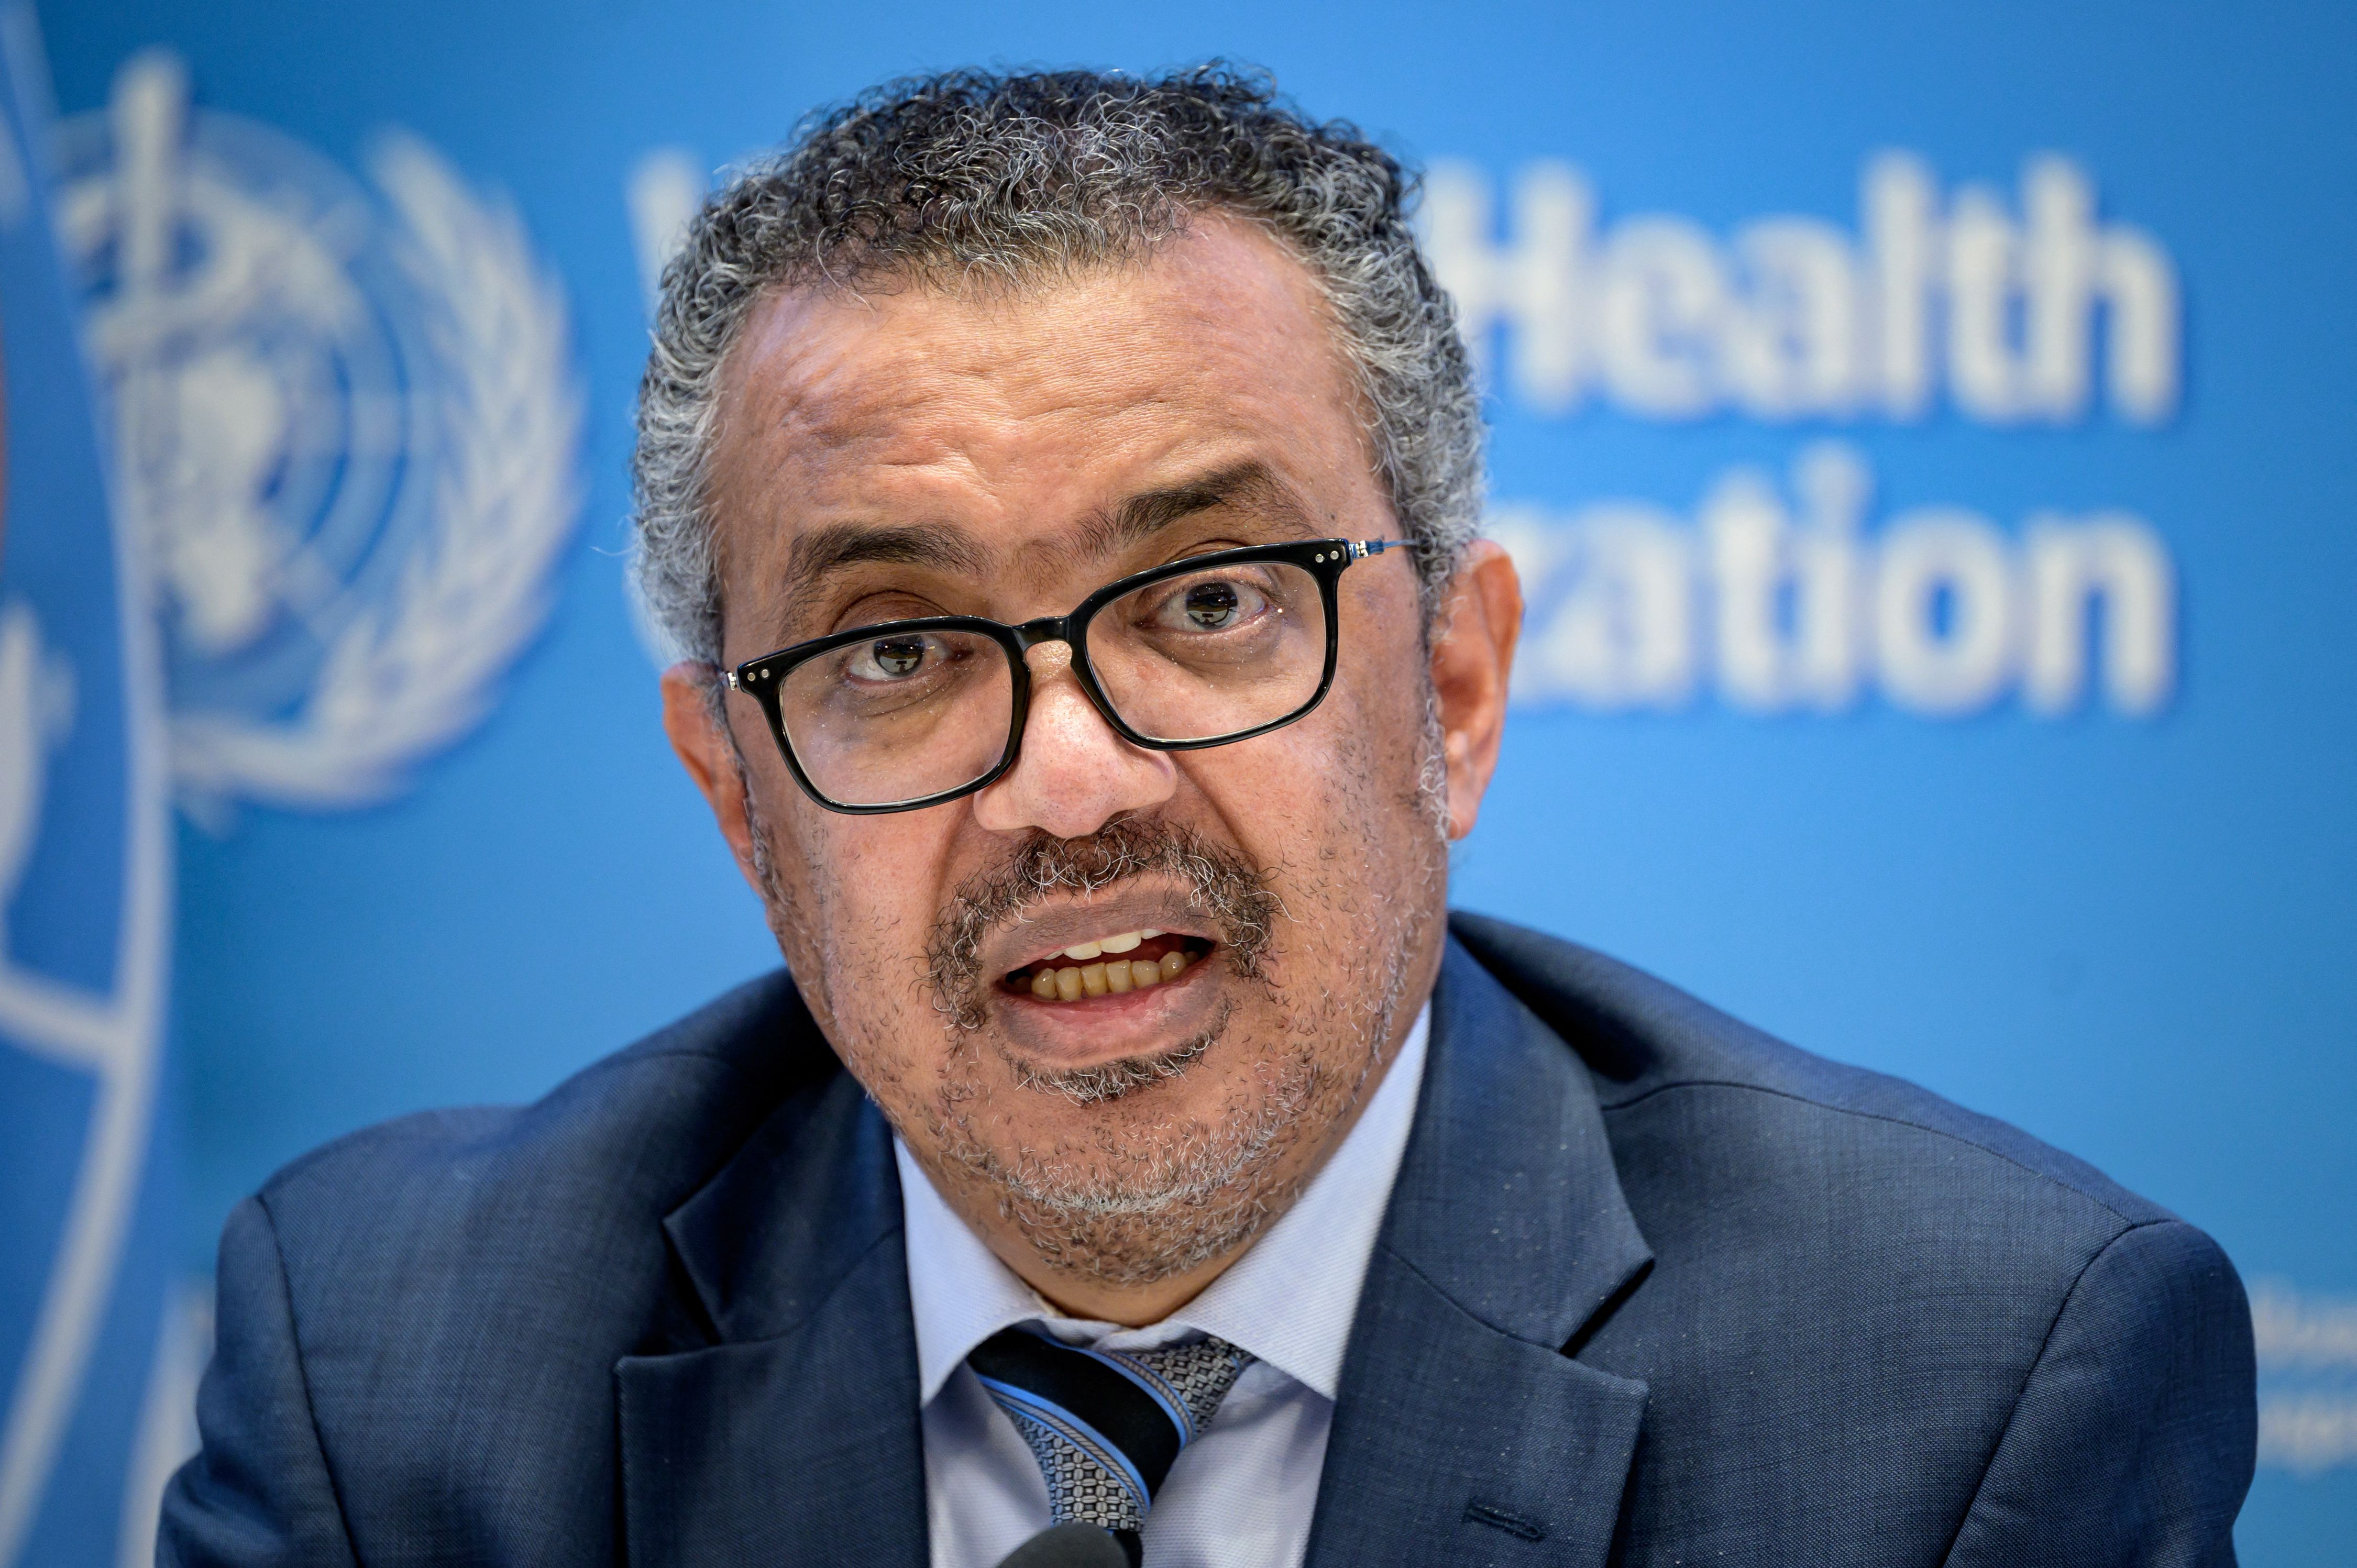 World Health Organization Director-General Tedros Adhanom Ghebreyesus gives a press conference on December 20, 2021 at the WHO headquarters in Geneva. 